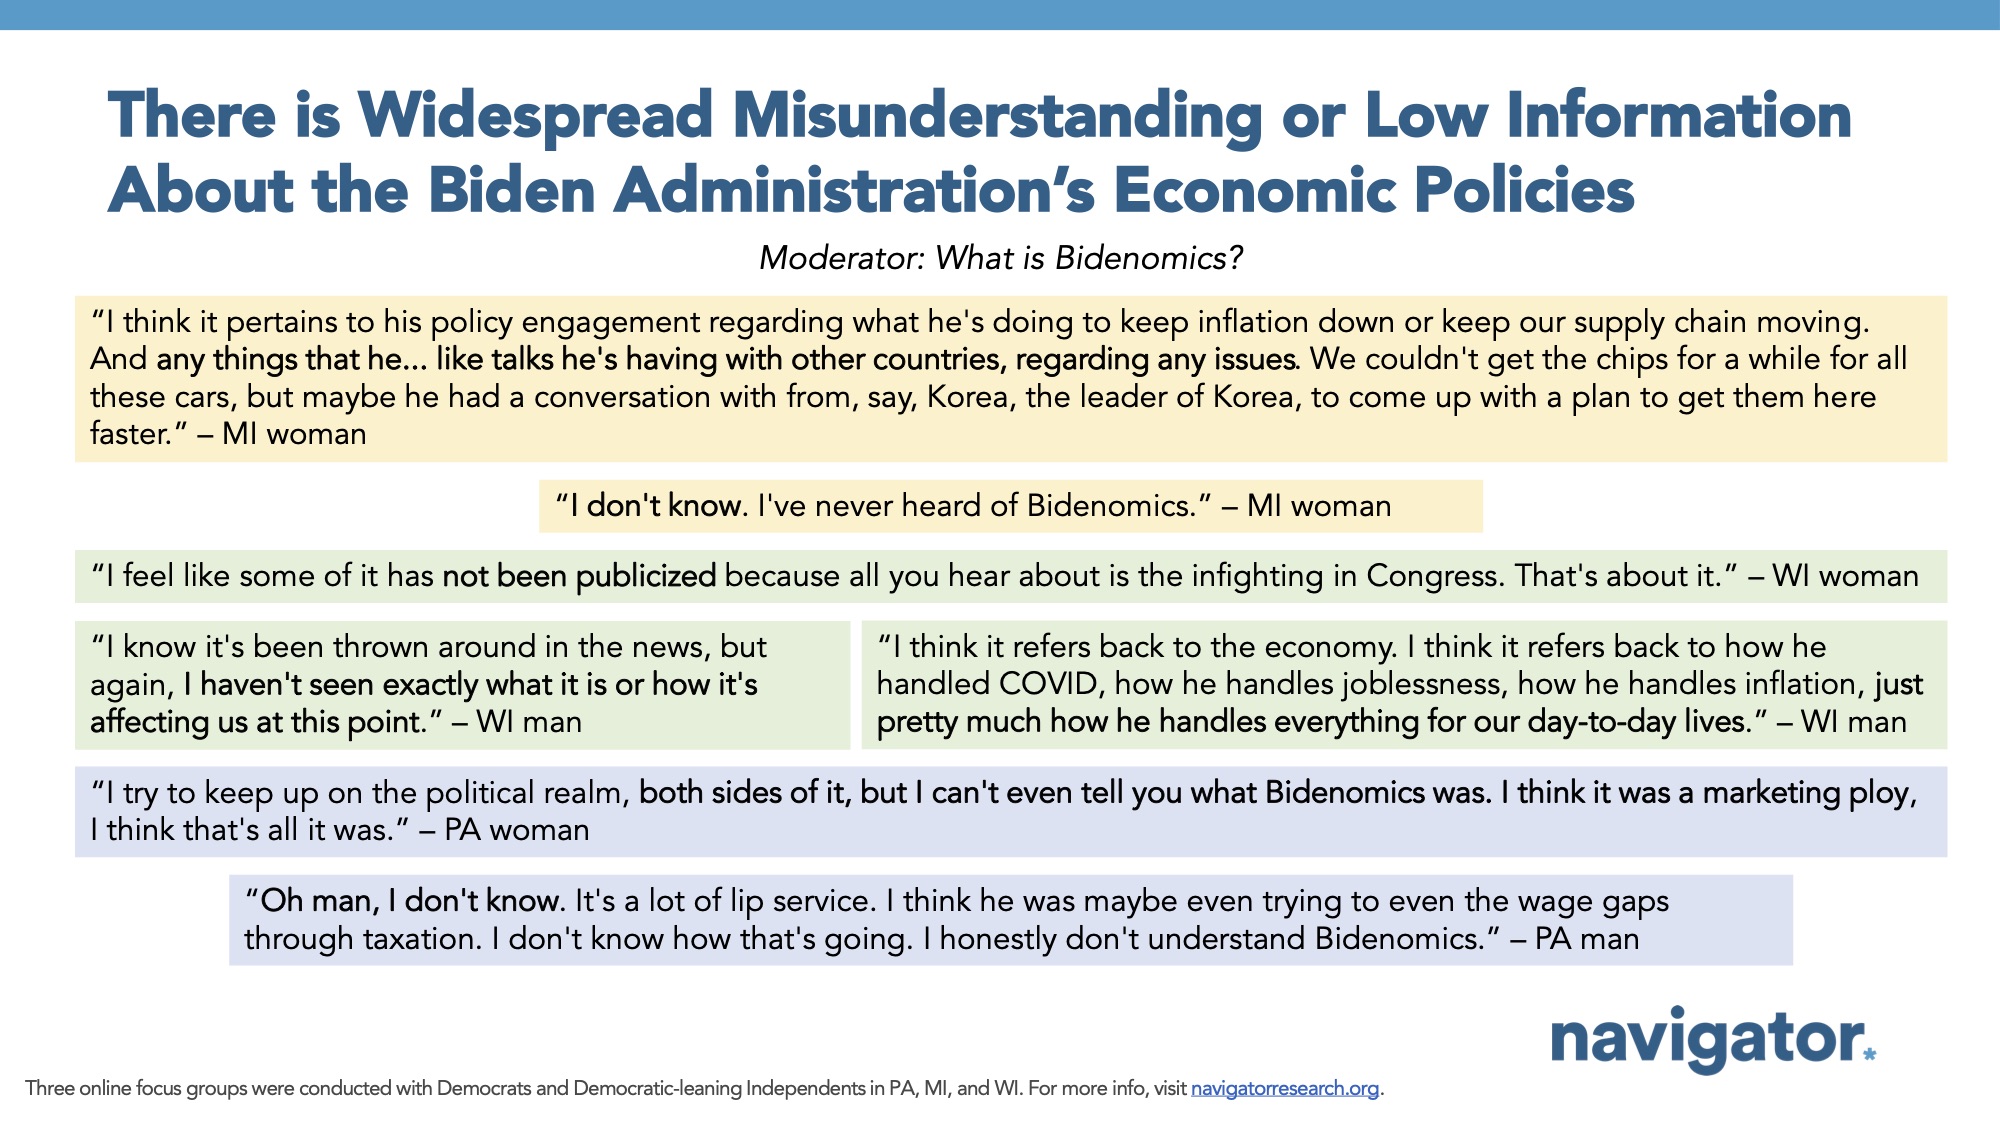 Focus group report slide titled: There is Widespread Misunderstanding or Low Information About the Biden Administration’s Economic Policies